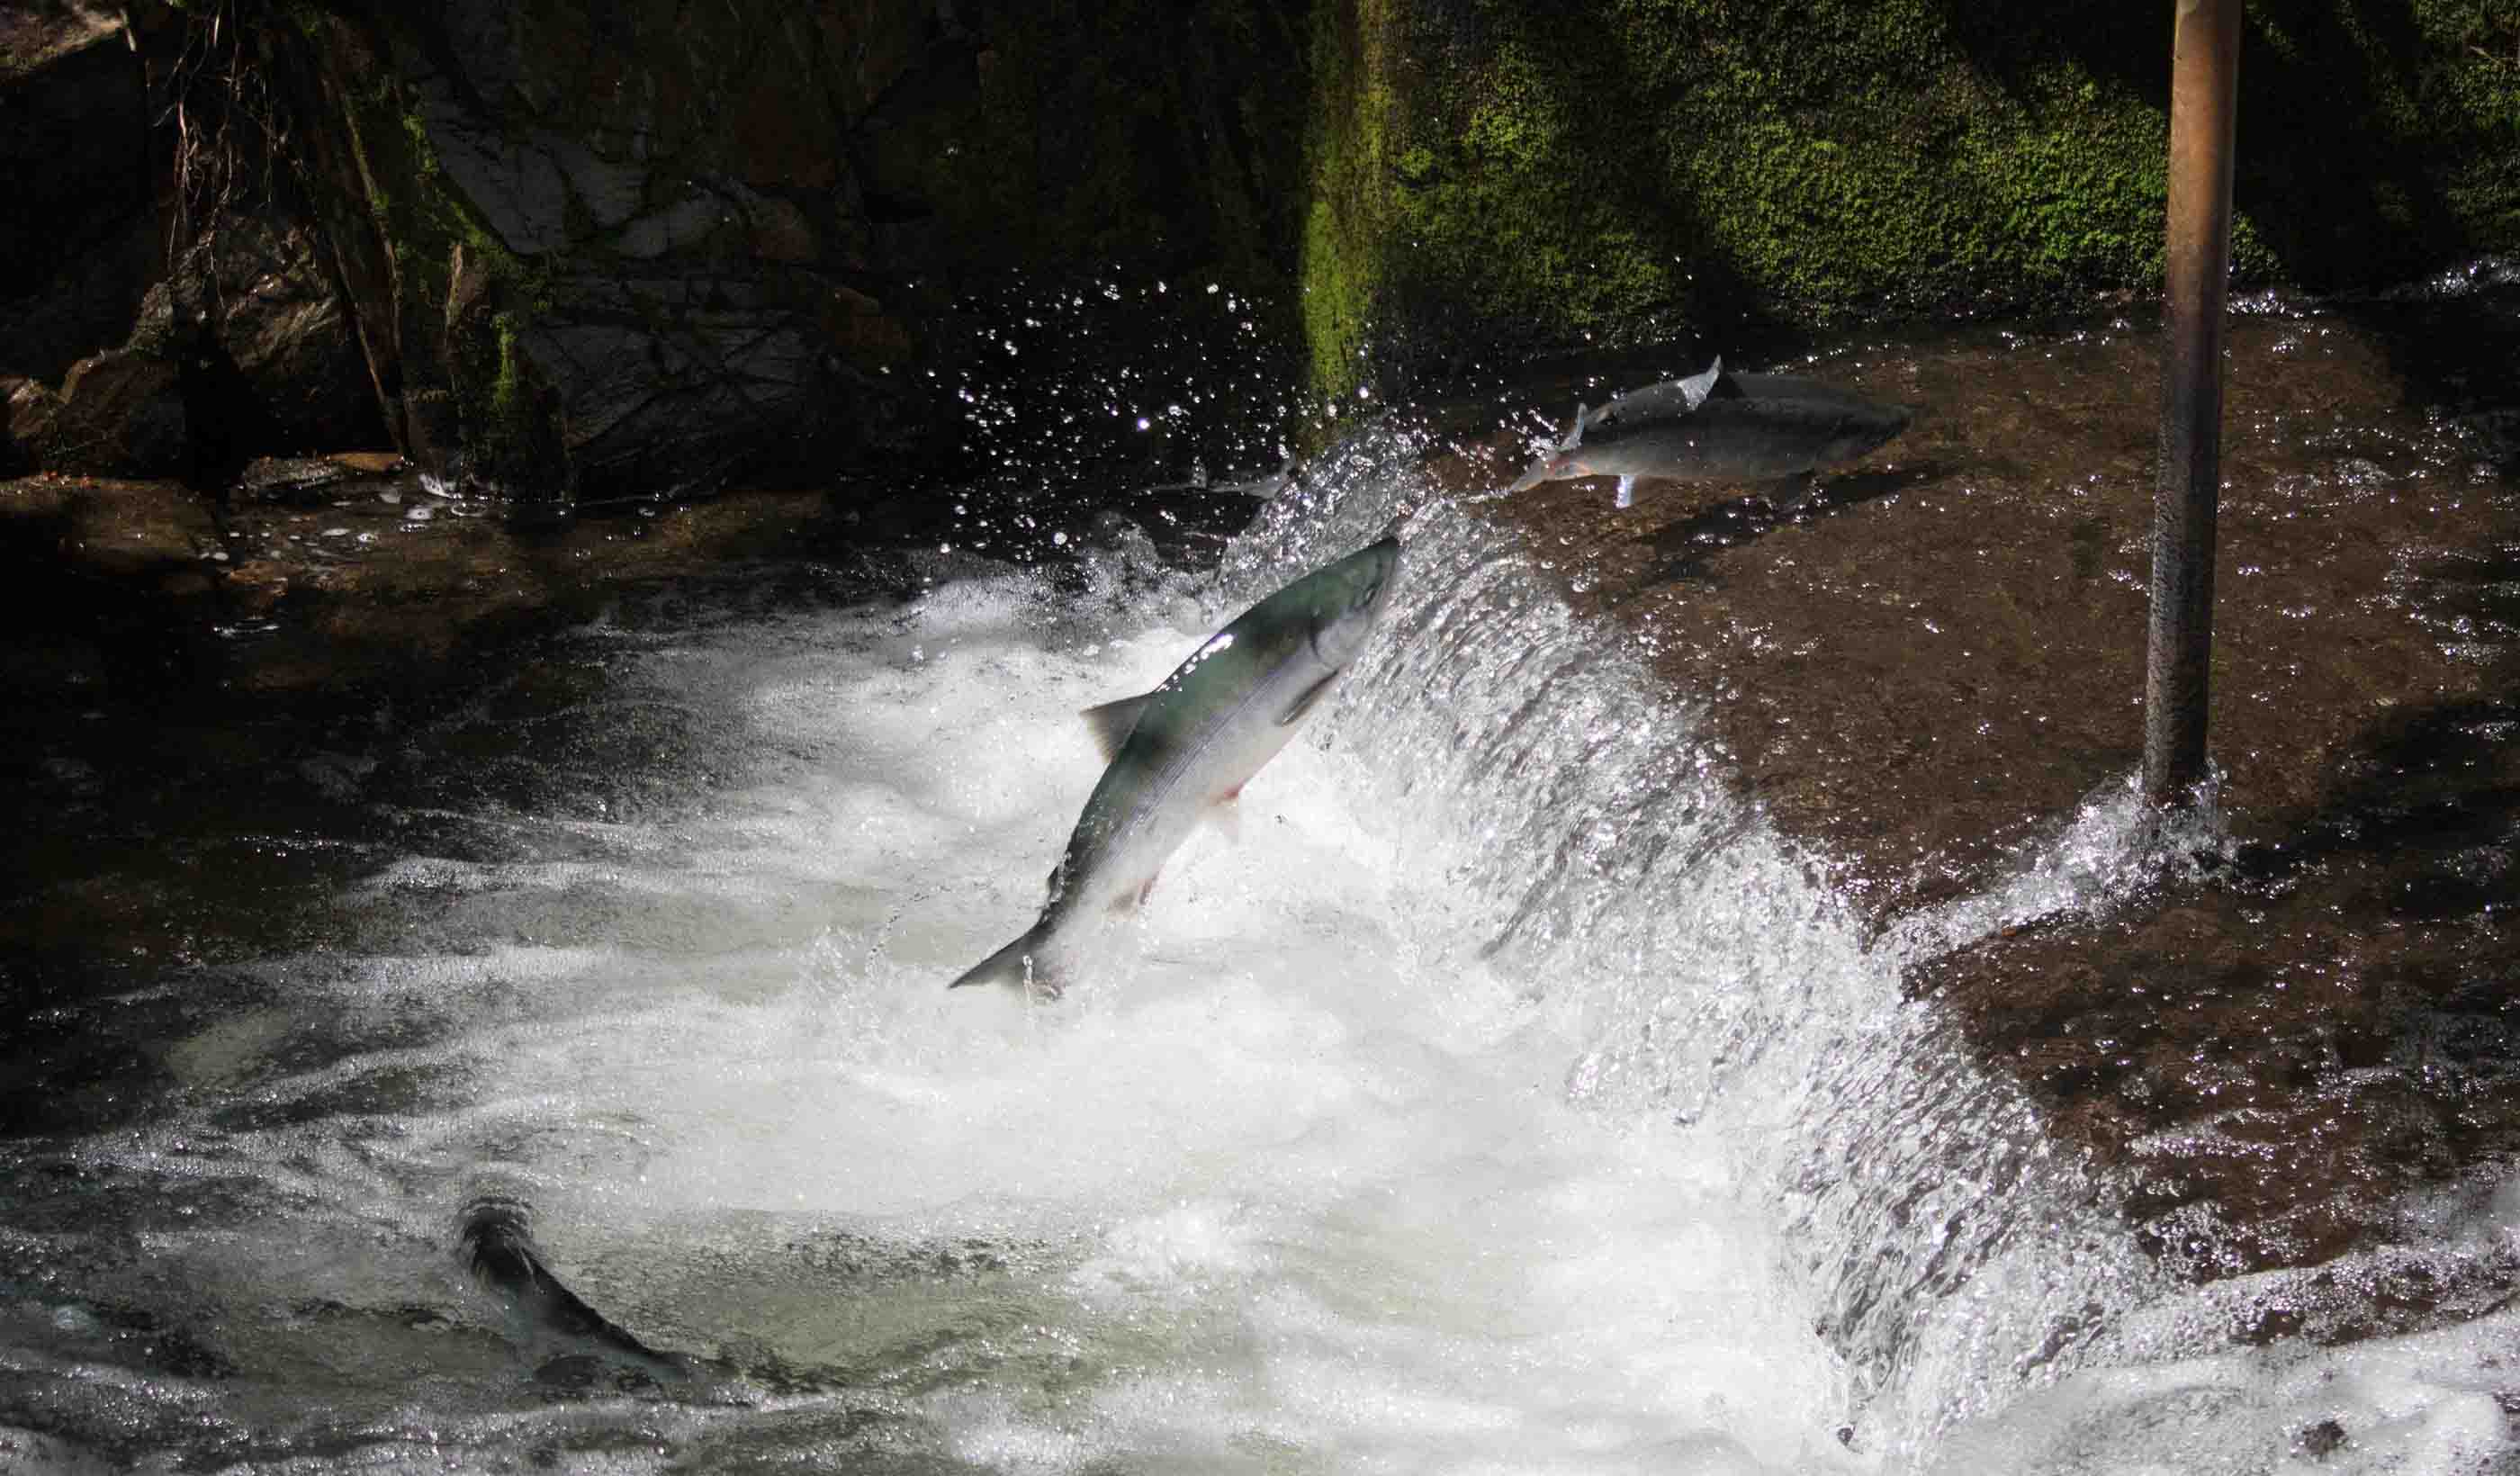 Fish passage: Fixing culverts is key to better stream habitat for salmon, other species